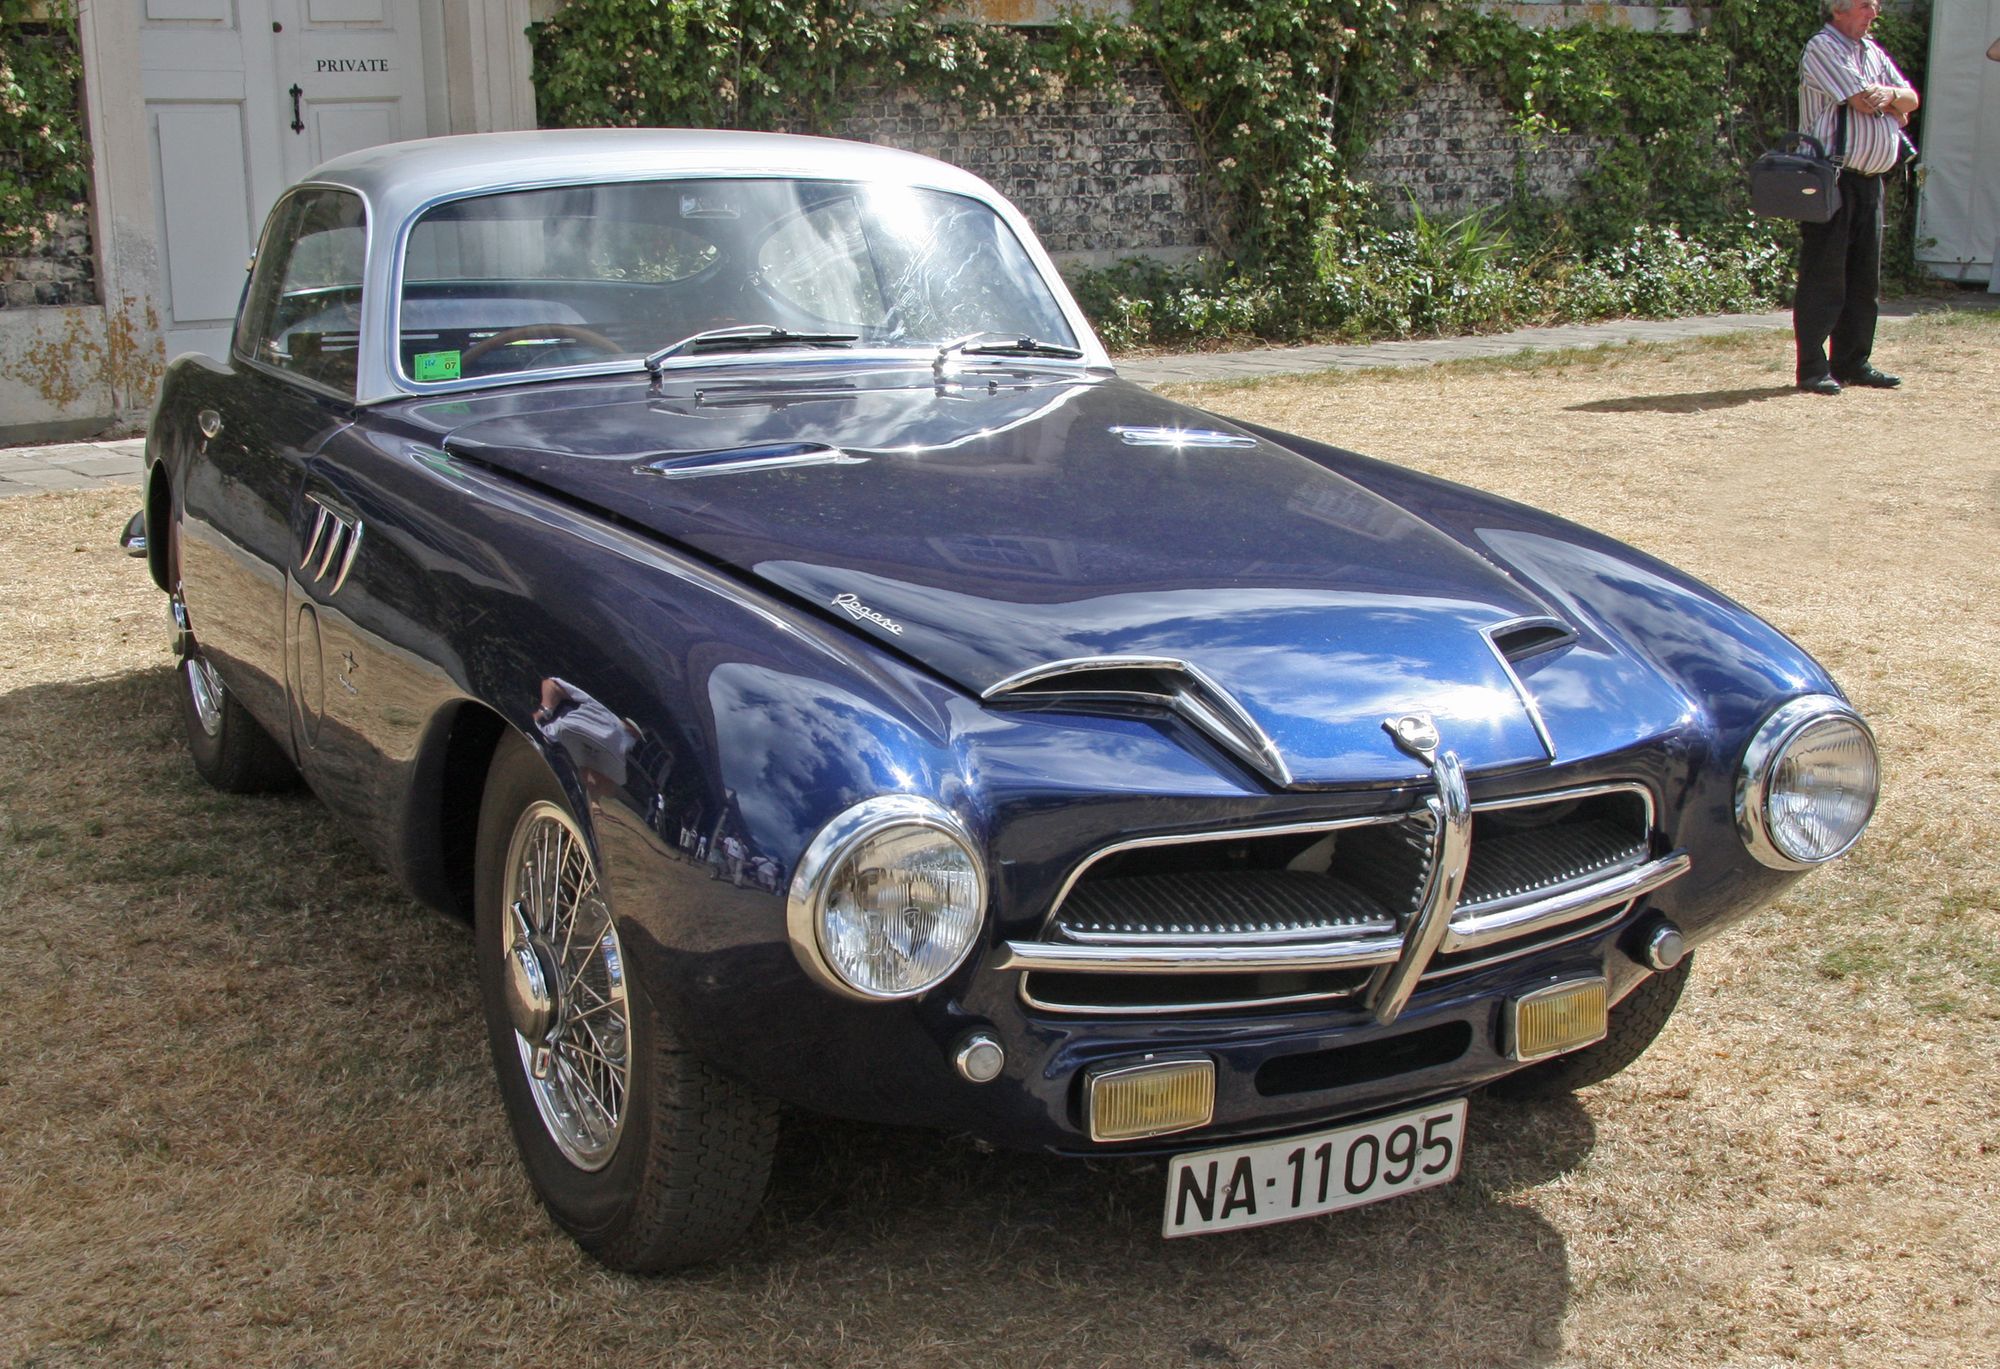 5 Of The World’s Hardest To Find Classic Cars